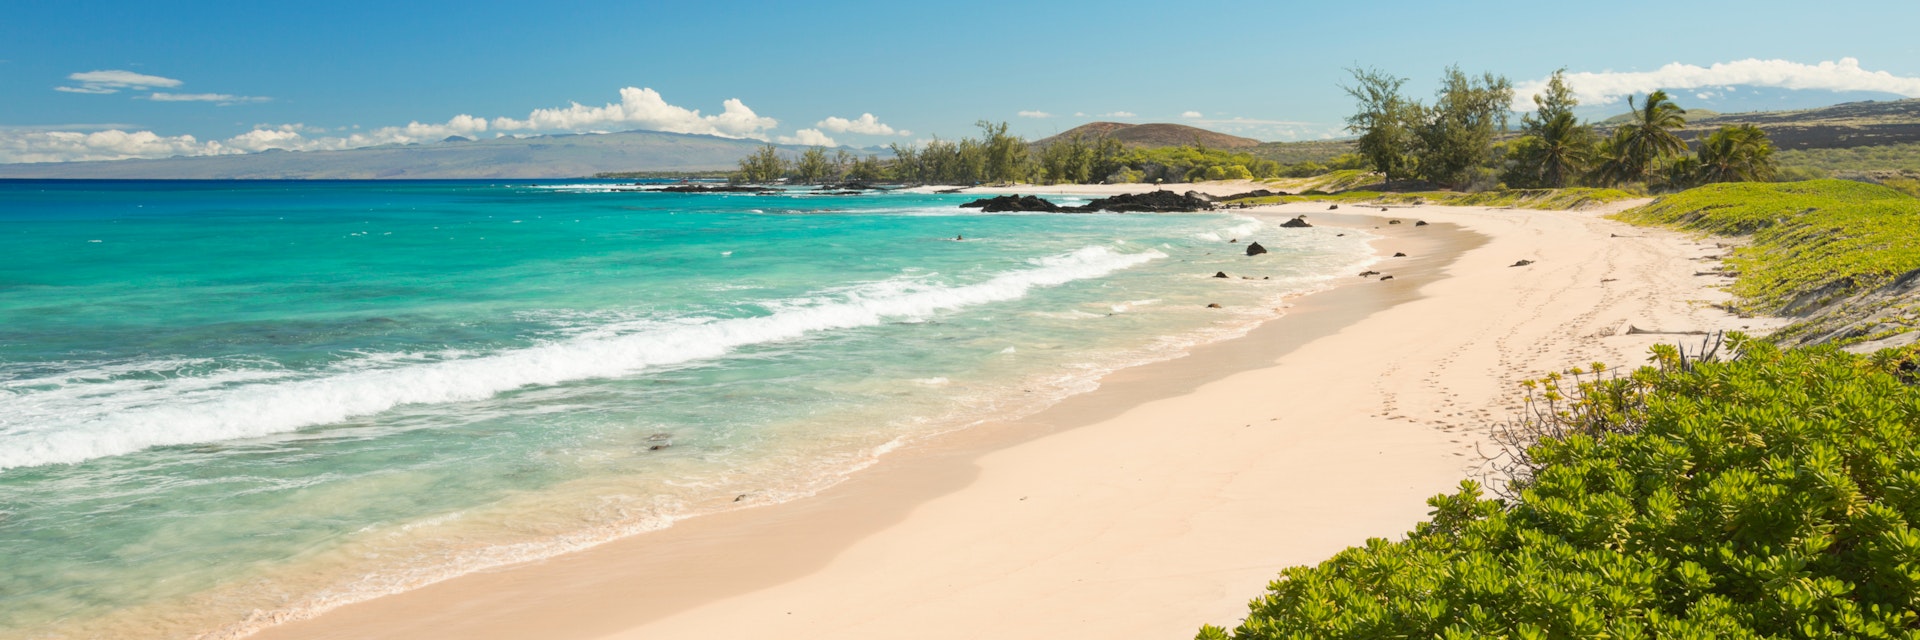 Makalawena Beach on Big Island Hawaii, USA, a beautiful remote white sand beach and turquoise water.; Shutterstock ID 1583199166; your: Sloane Tucker; gl: 65050; netsuite: Online Editorial; full: POI
1583199166